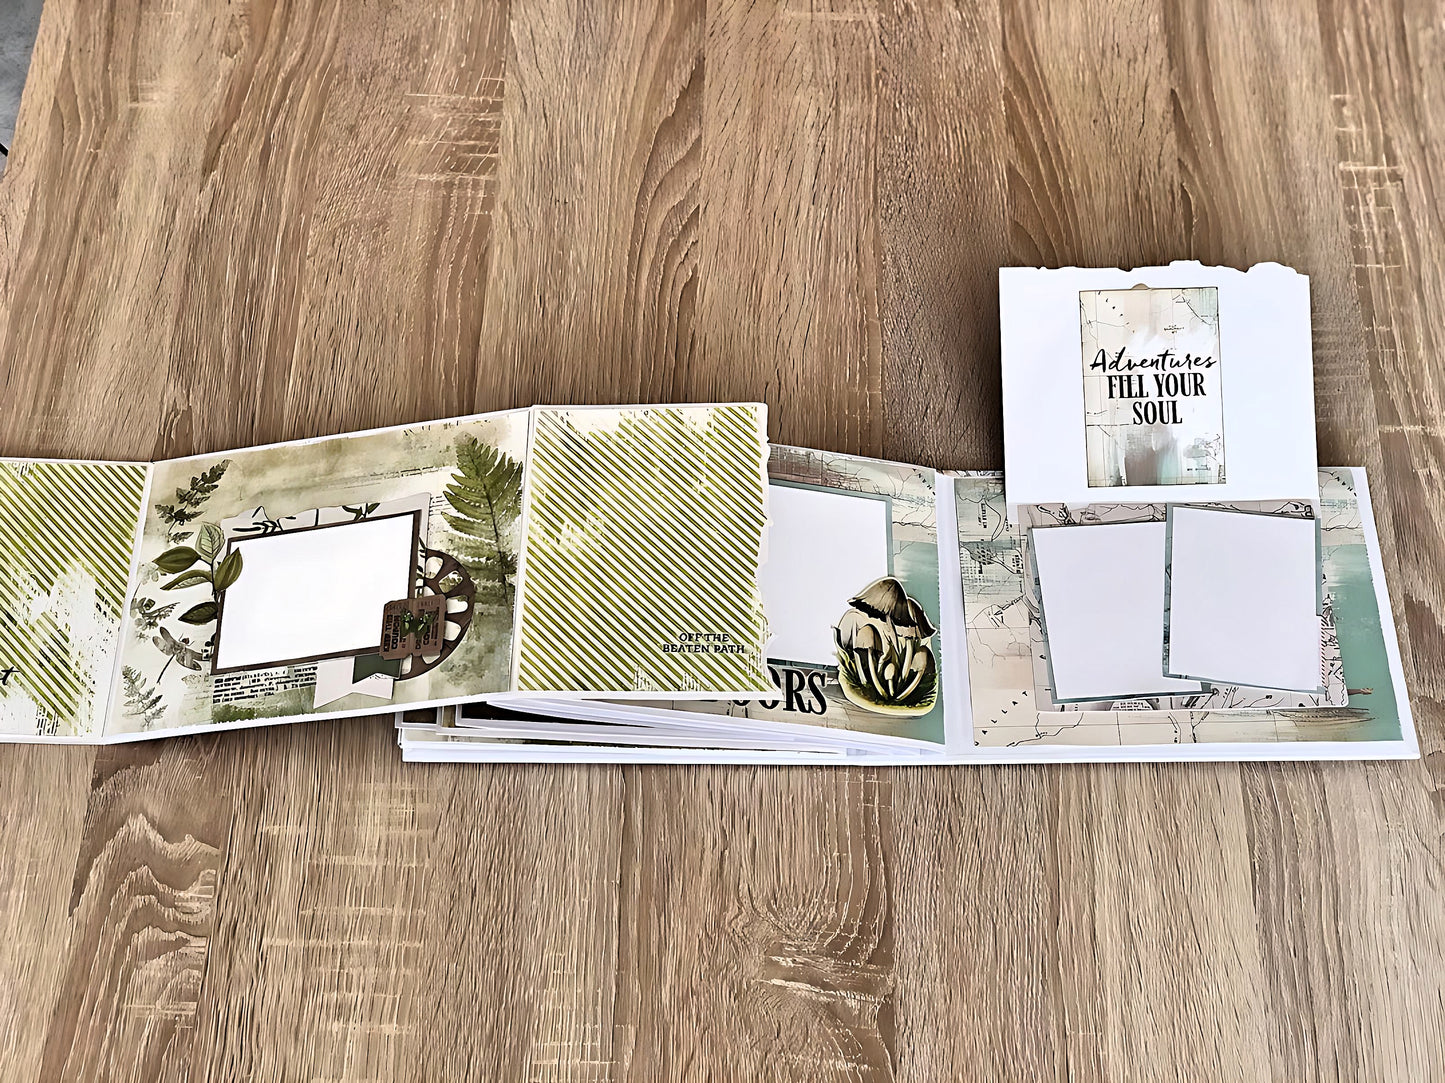 Scrapbooking Photo Album "Adventure Awaits", Interactive Photo Book with Pockets, Hiking Vacation Woods Memory Book, Gift for Creative